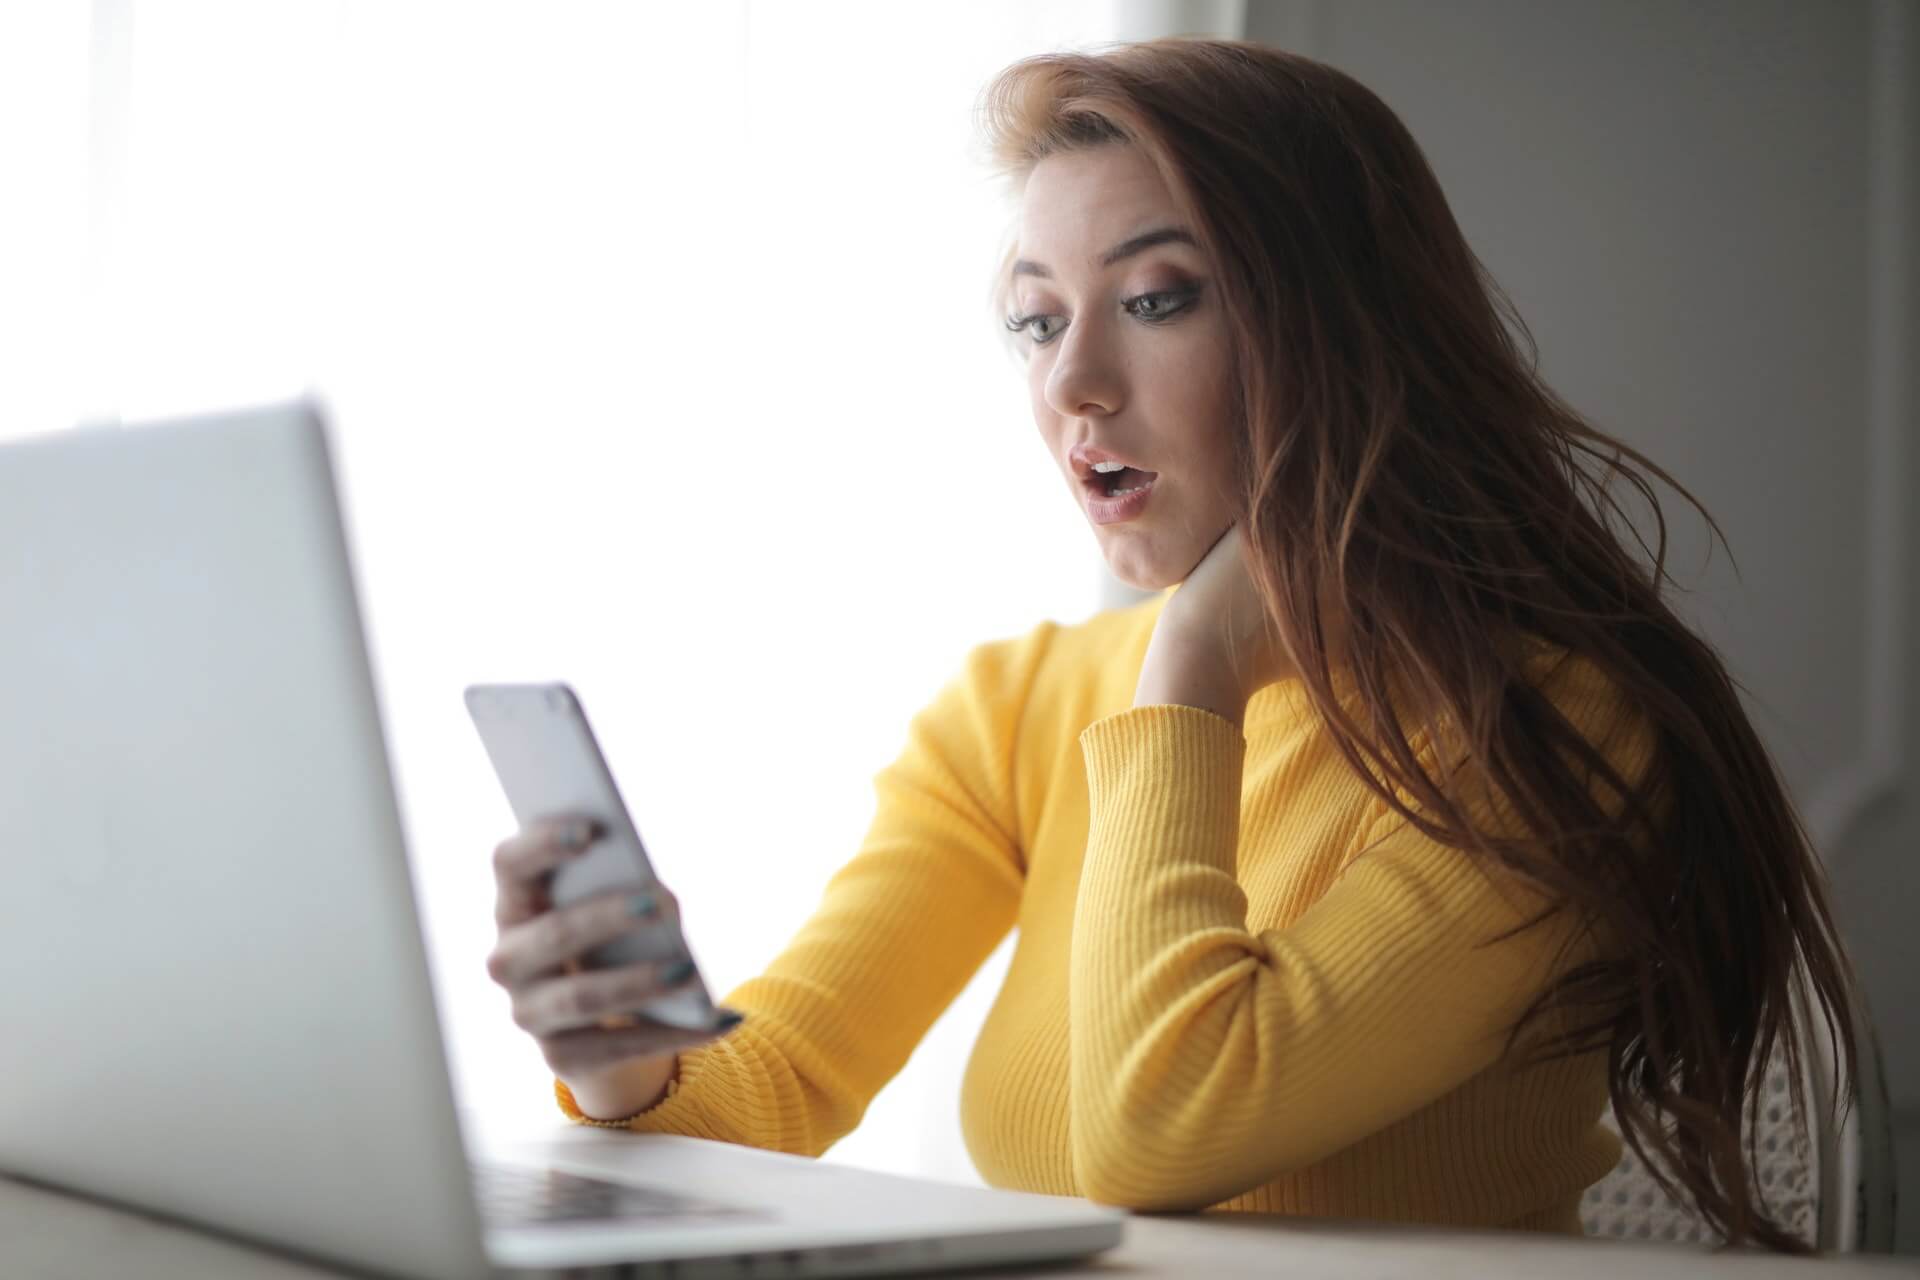 tips to effectively work from home include staying off your phone unlike the girl in the photo